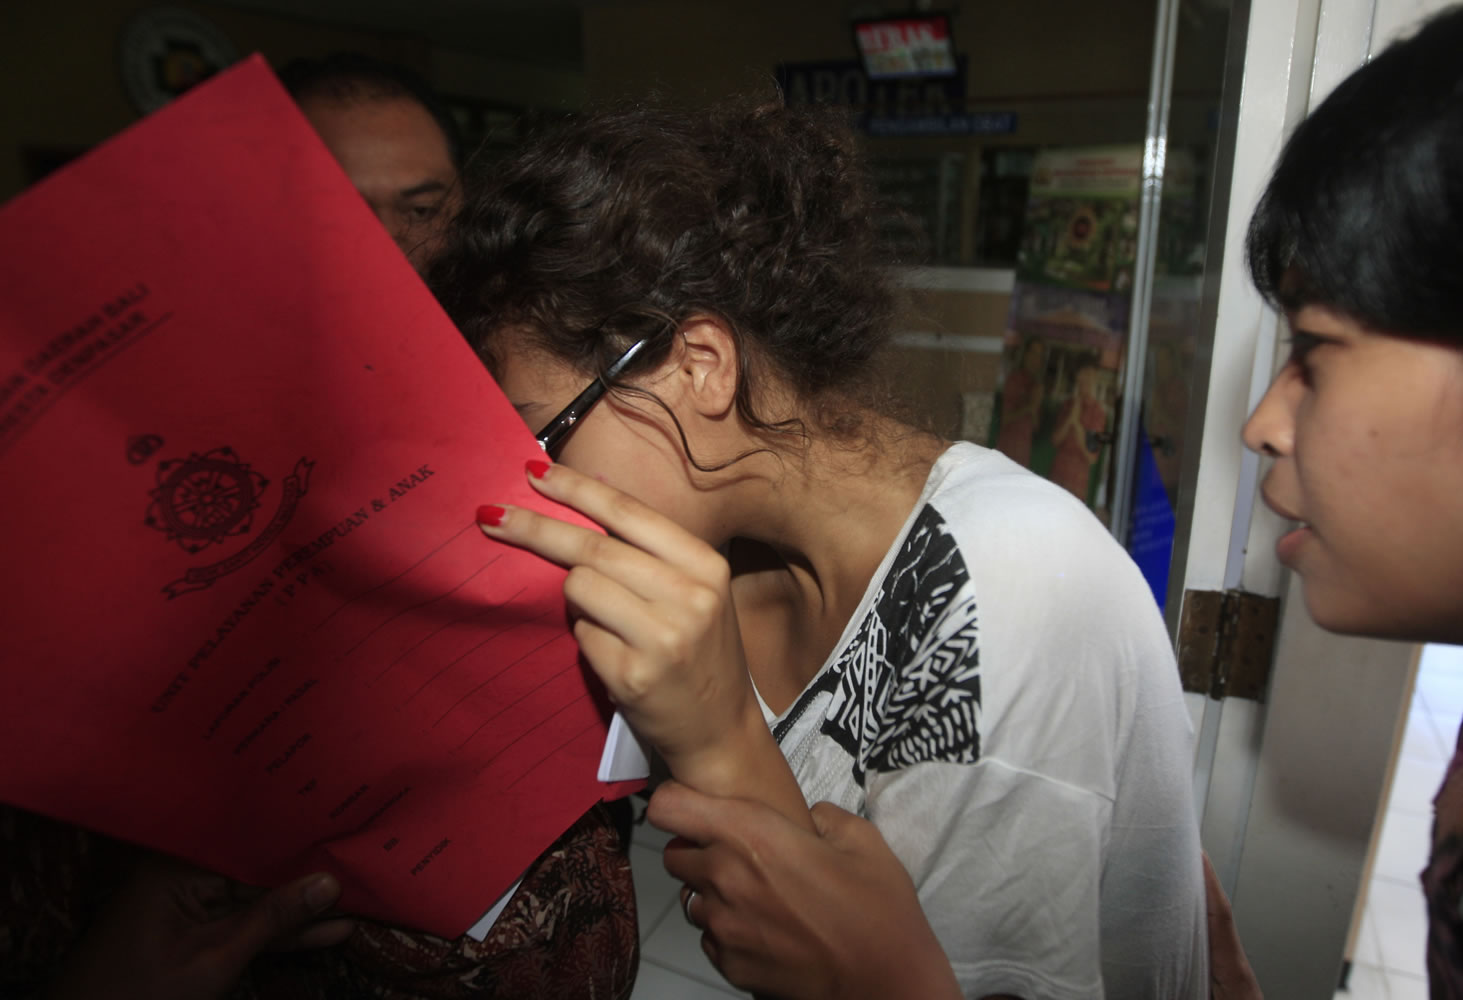 Heather Mack, covering her face, is led to a hospital for a medical check by Indonesian police officers in relation to the death of her mother Sheila von Wiese-Mack in Bali, Indonesia, on Friday, Aug. 15.